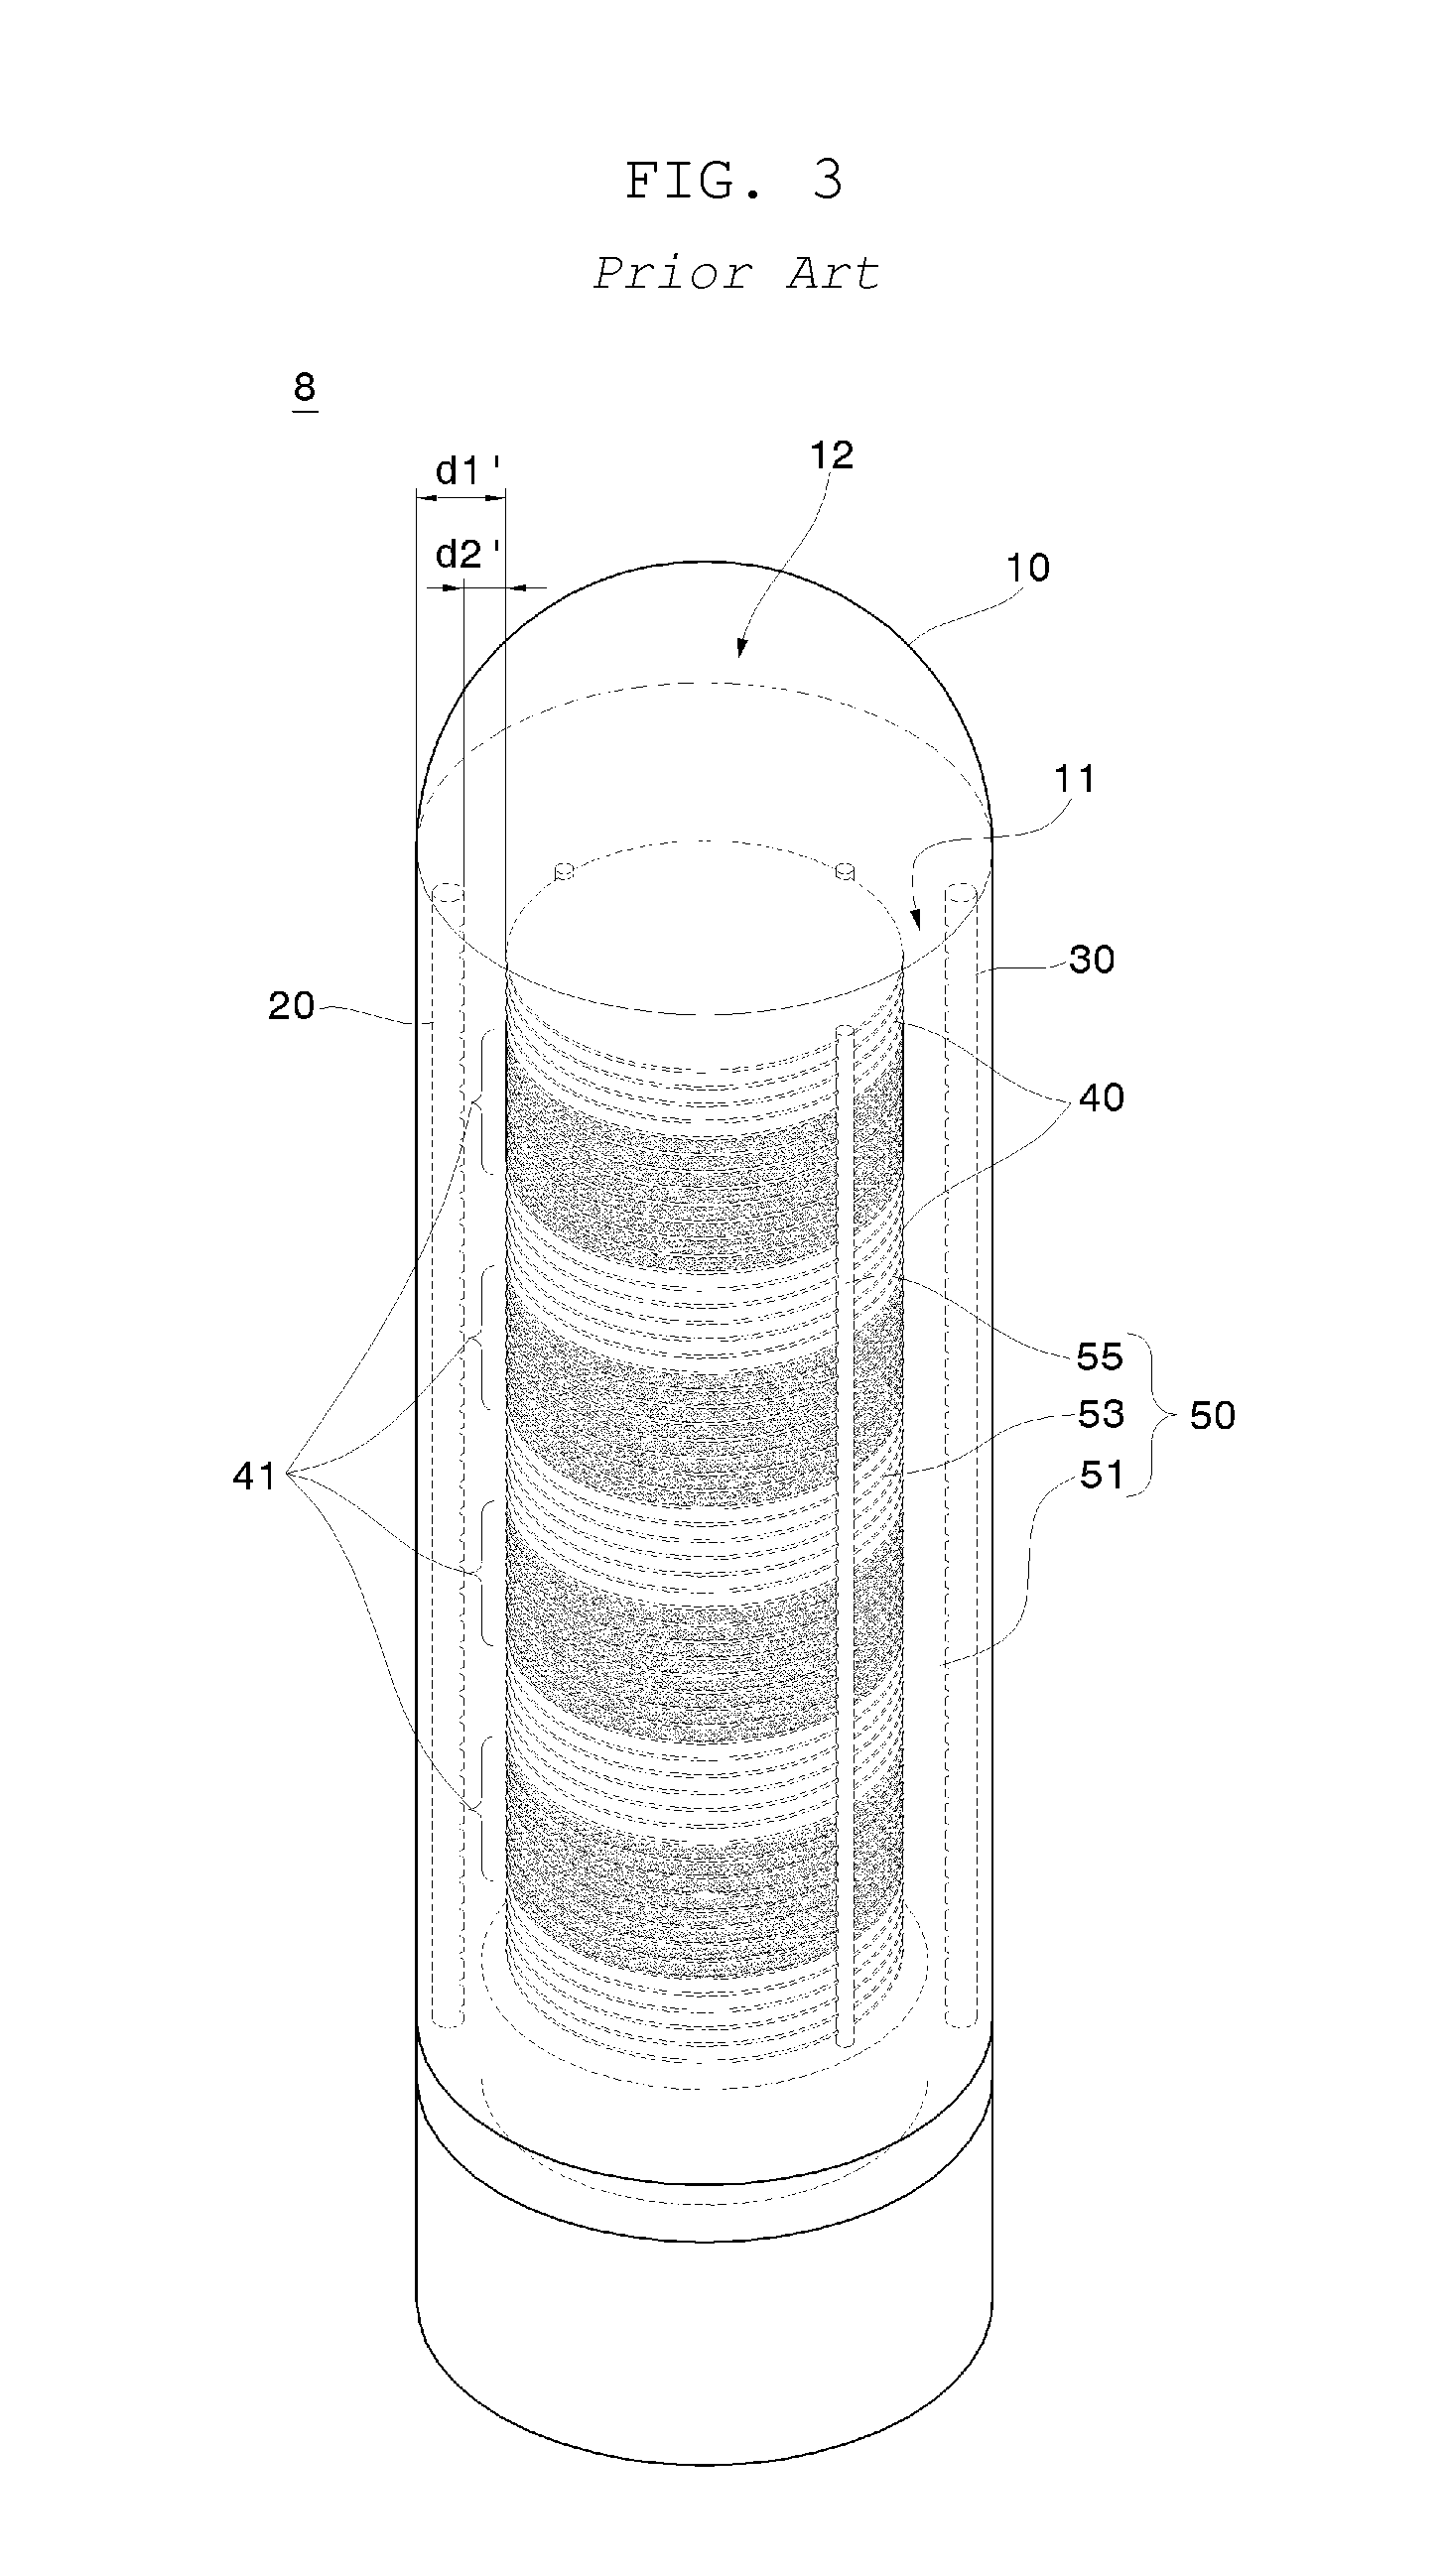 Cluster-batch type system for processing substrate